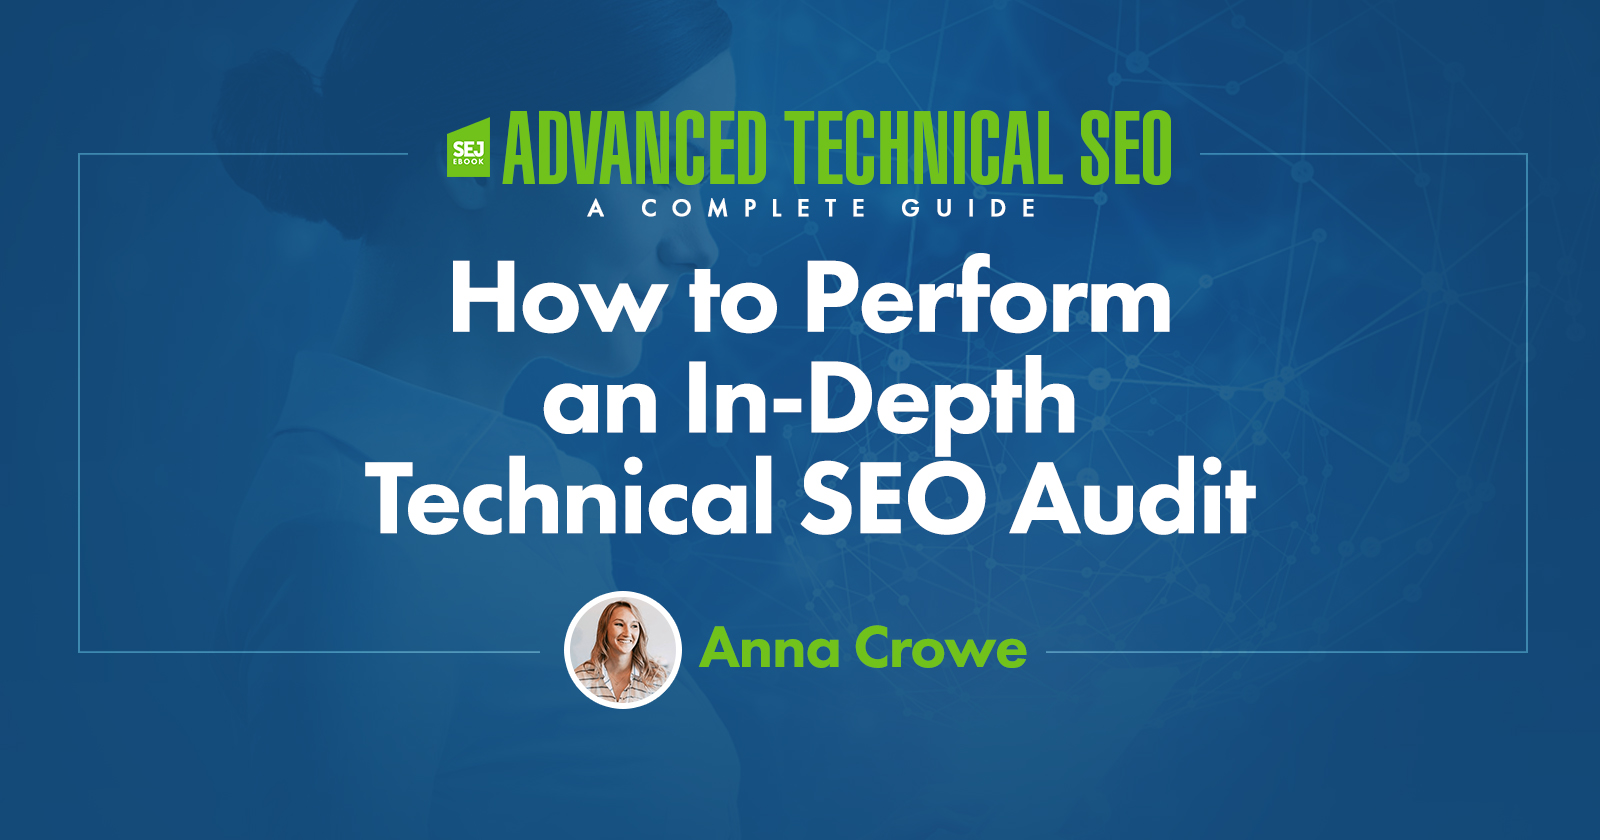 How to Perform an In-Depth Technical SEO Audit